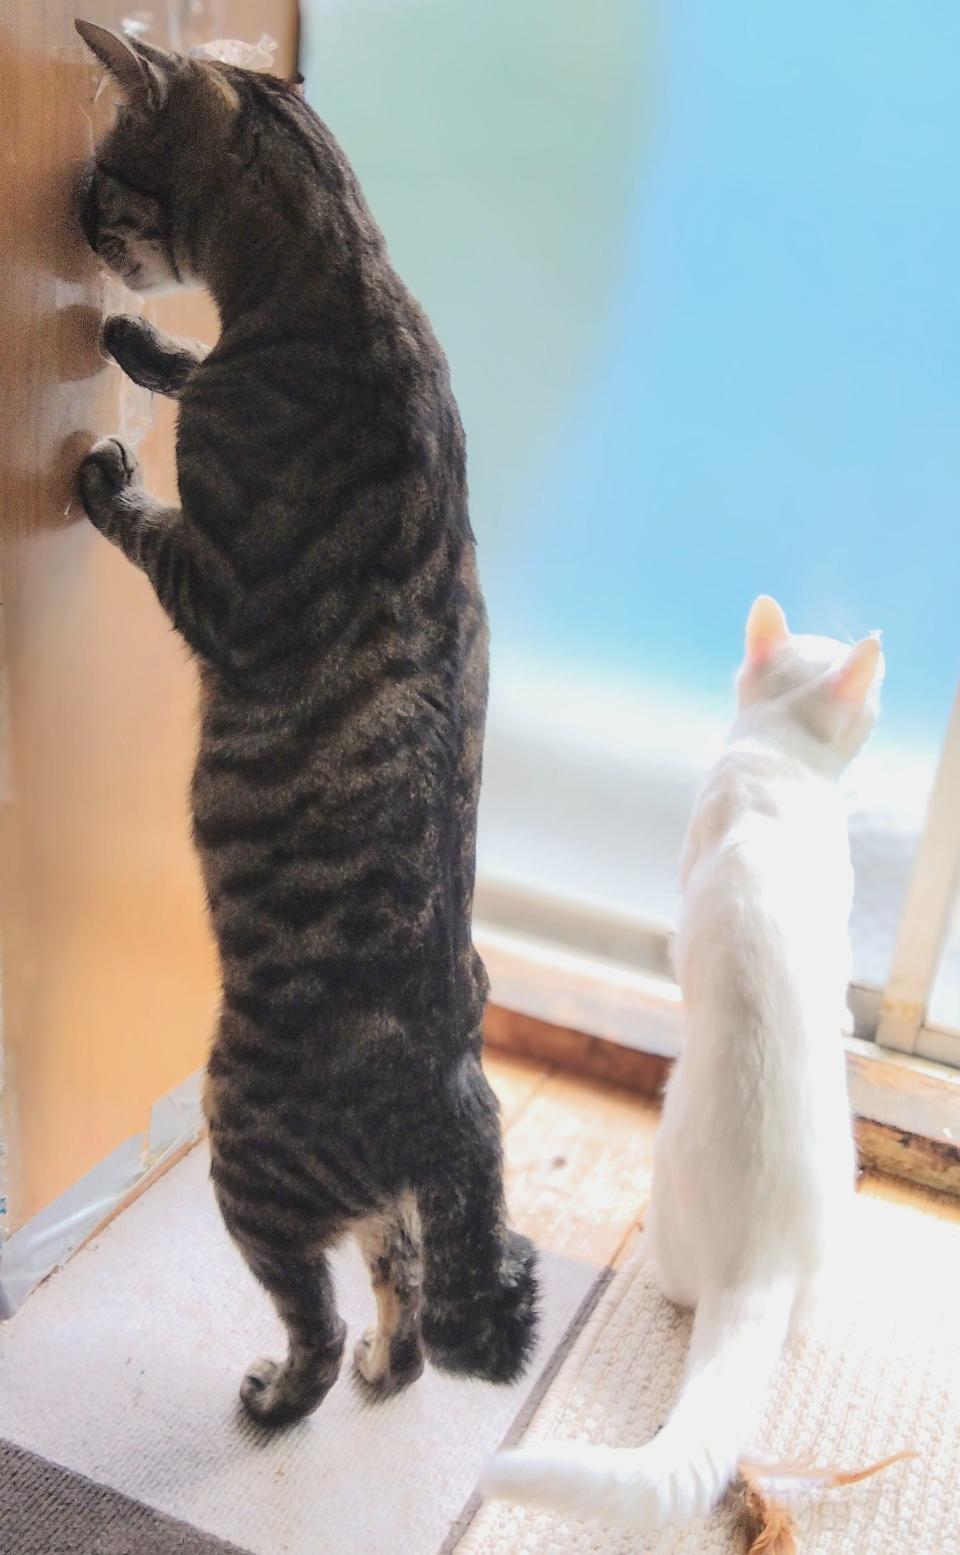 A white cat looks out while a tabby cat climbs a wall